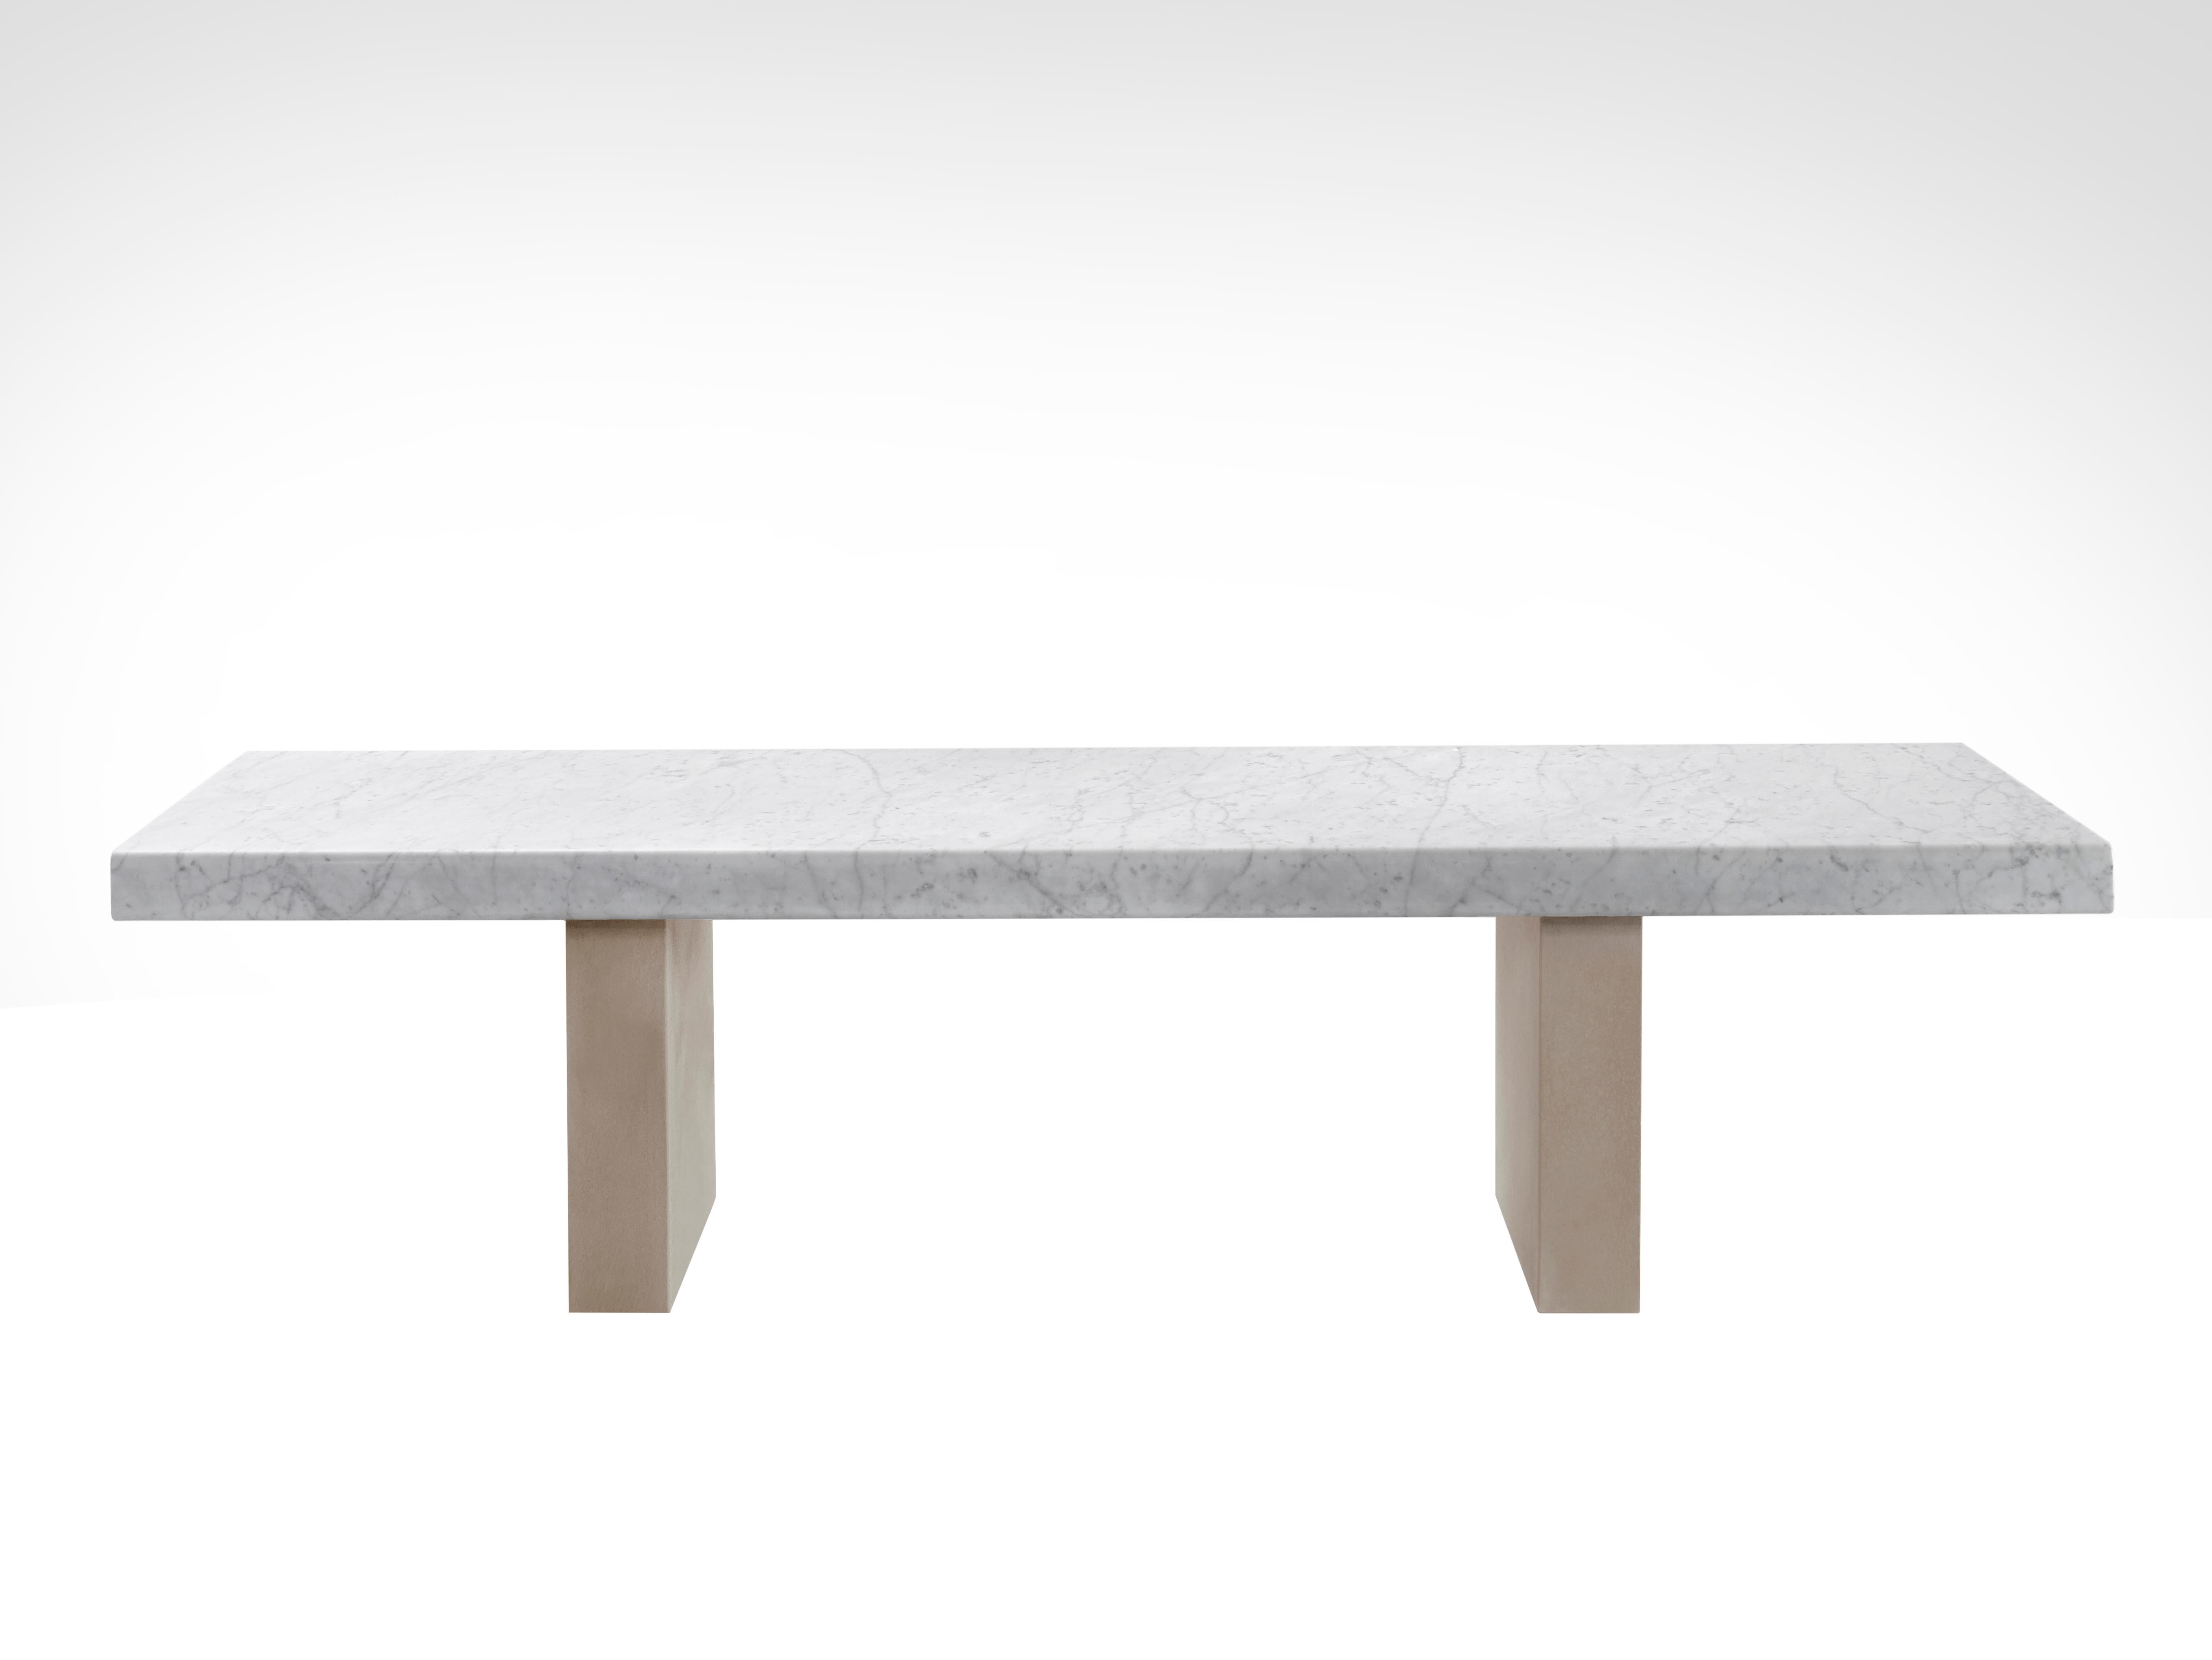 Salvatori Span Outdoor Dining Table in Bianco Carrara and Avana by John Pawson For Sale